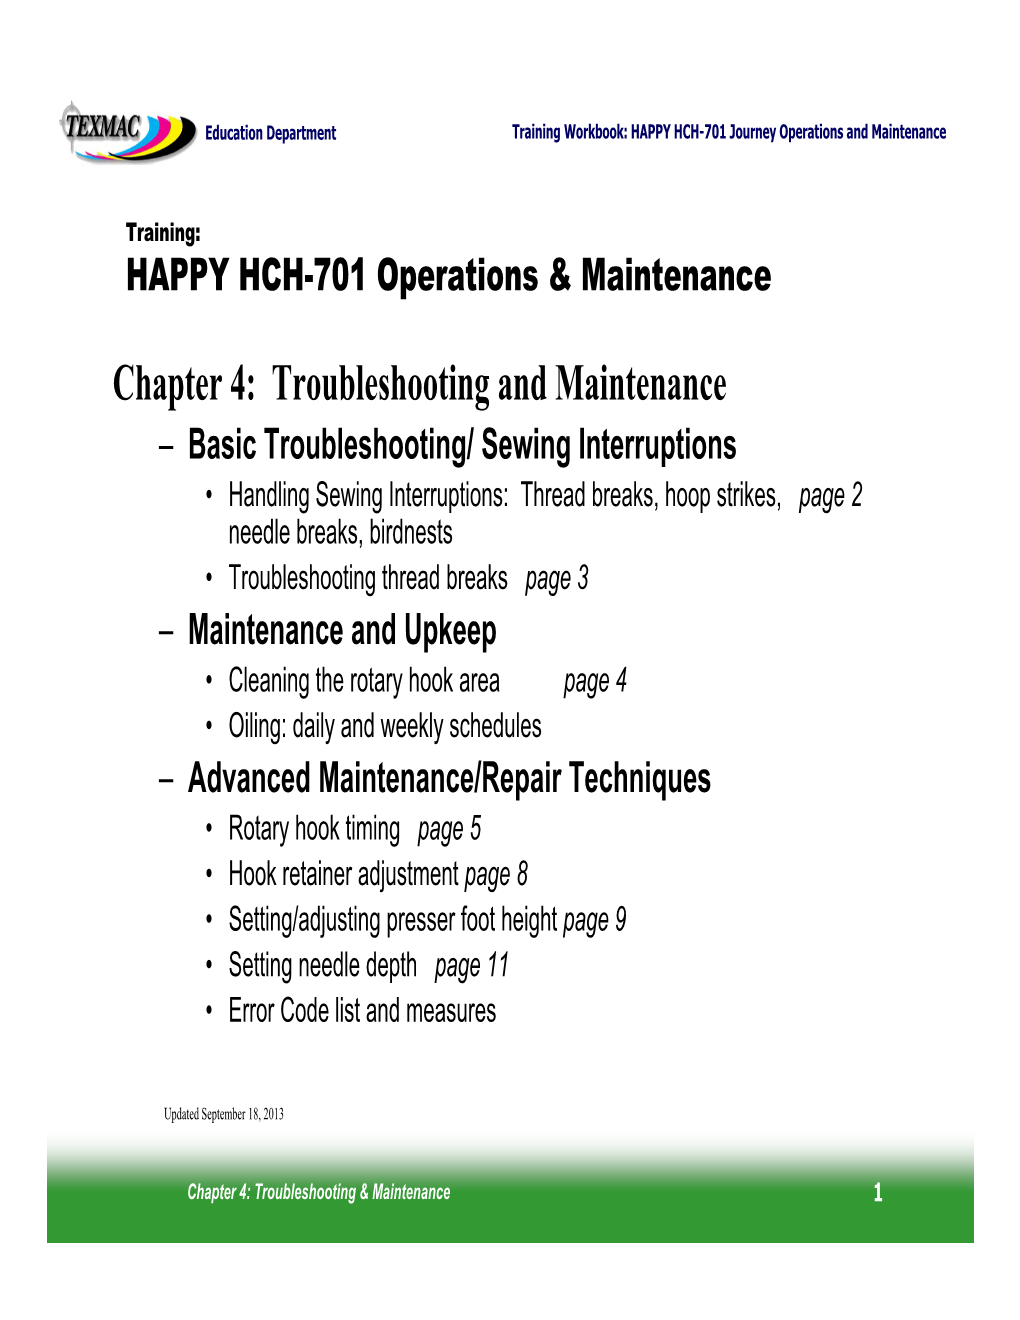 Chapter 4: Troubleshooting and Maintenance